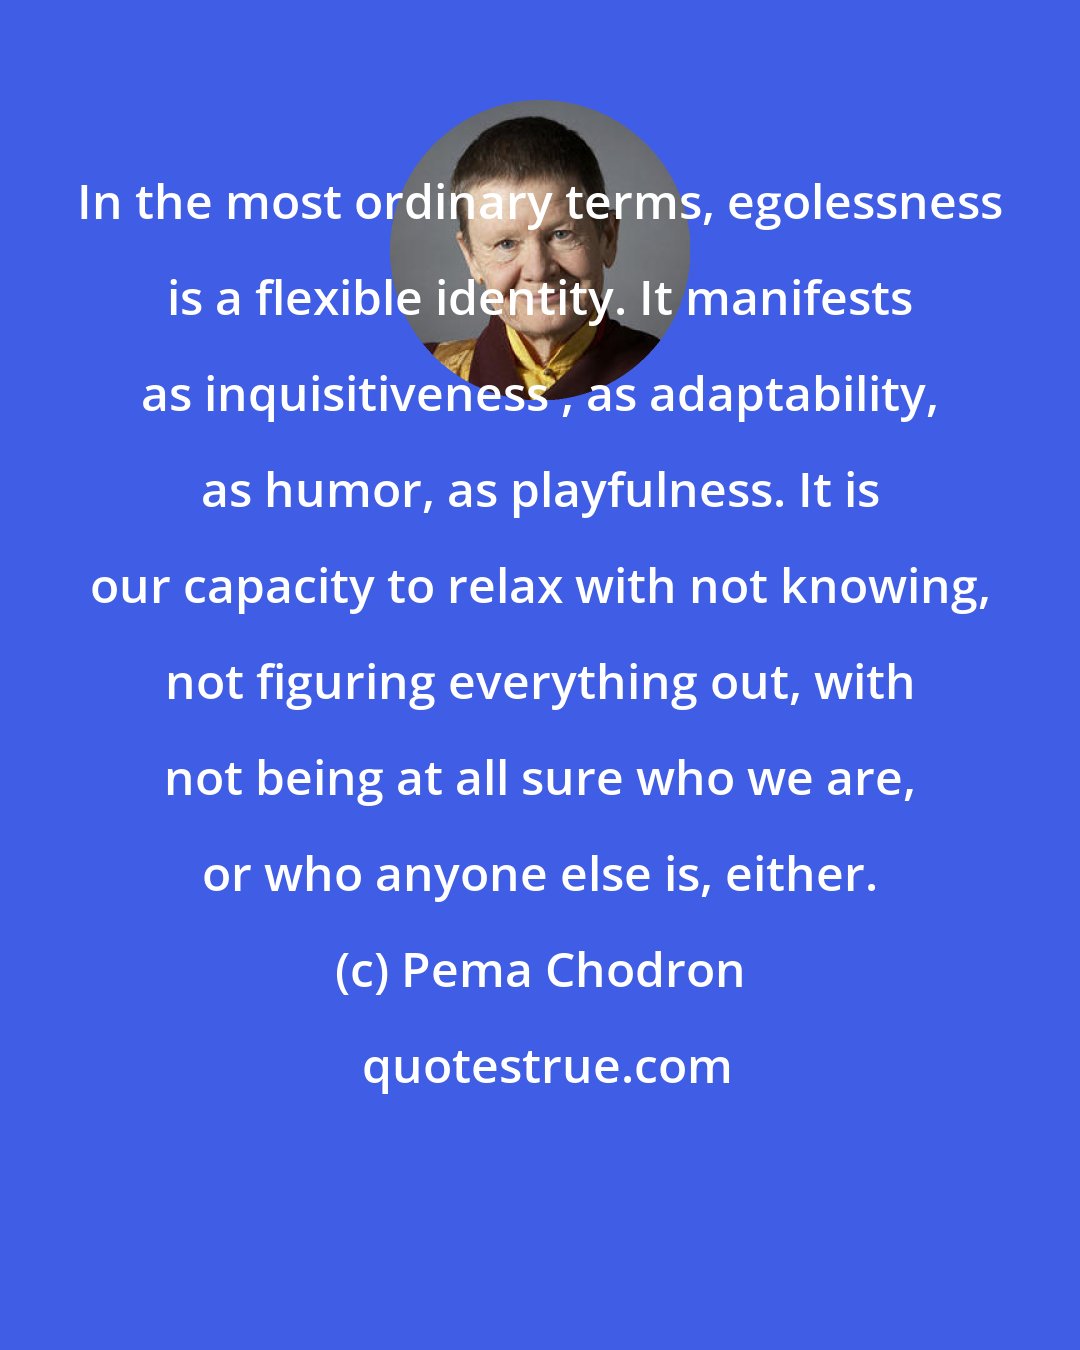 Pema Chodron: In the most ordinary terms, egolessness is a flexible identity. It manifests as inquisitiveness , as adaptability, as humor, as playfulness. It is our capacity to relax with not knowing, not figuring everything out, with not being at all sure who we are, or who anyone else is, either.